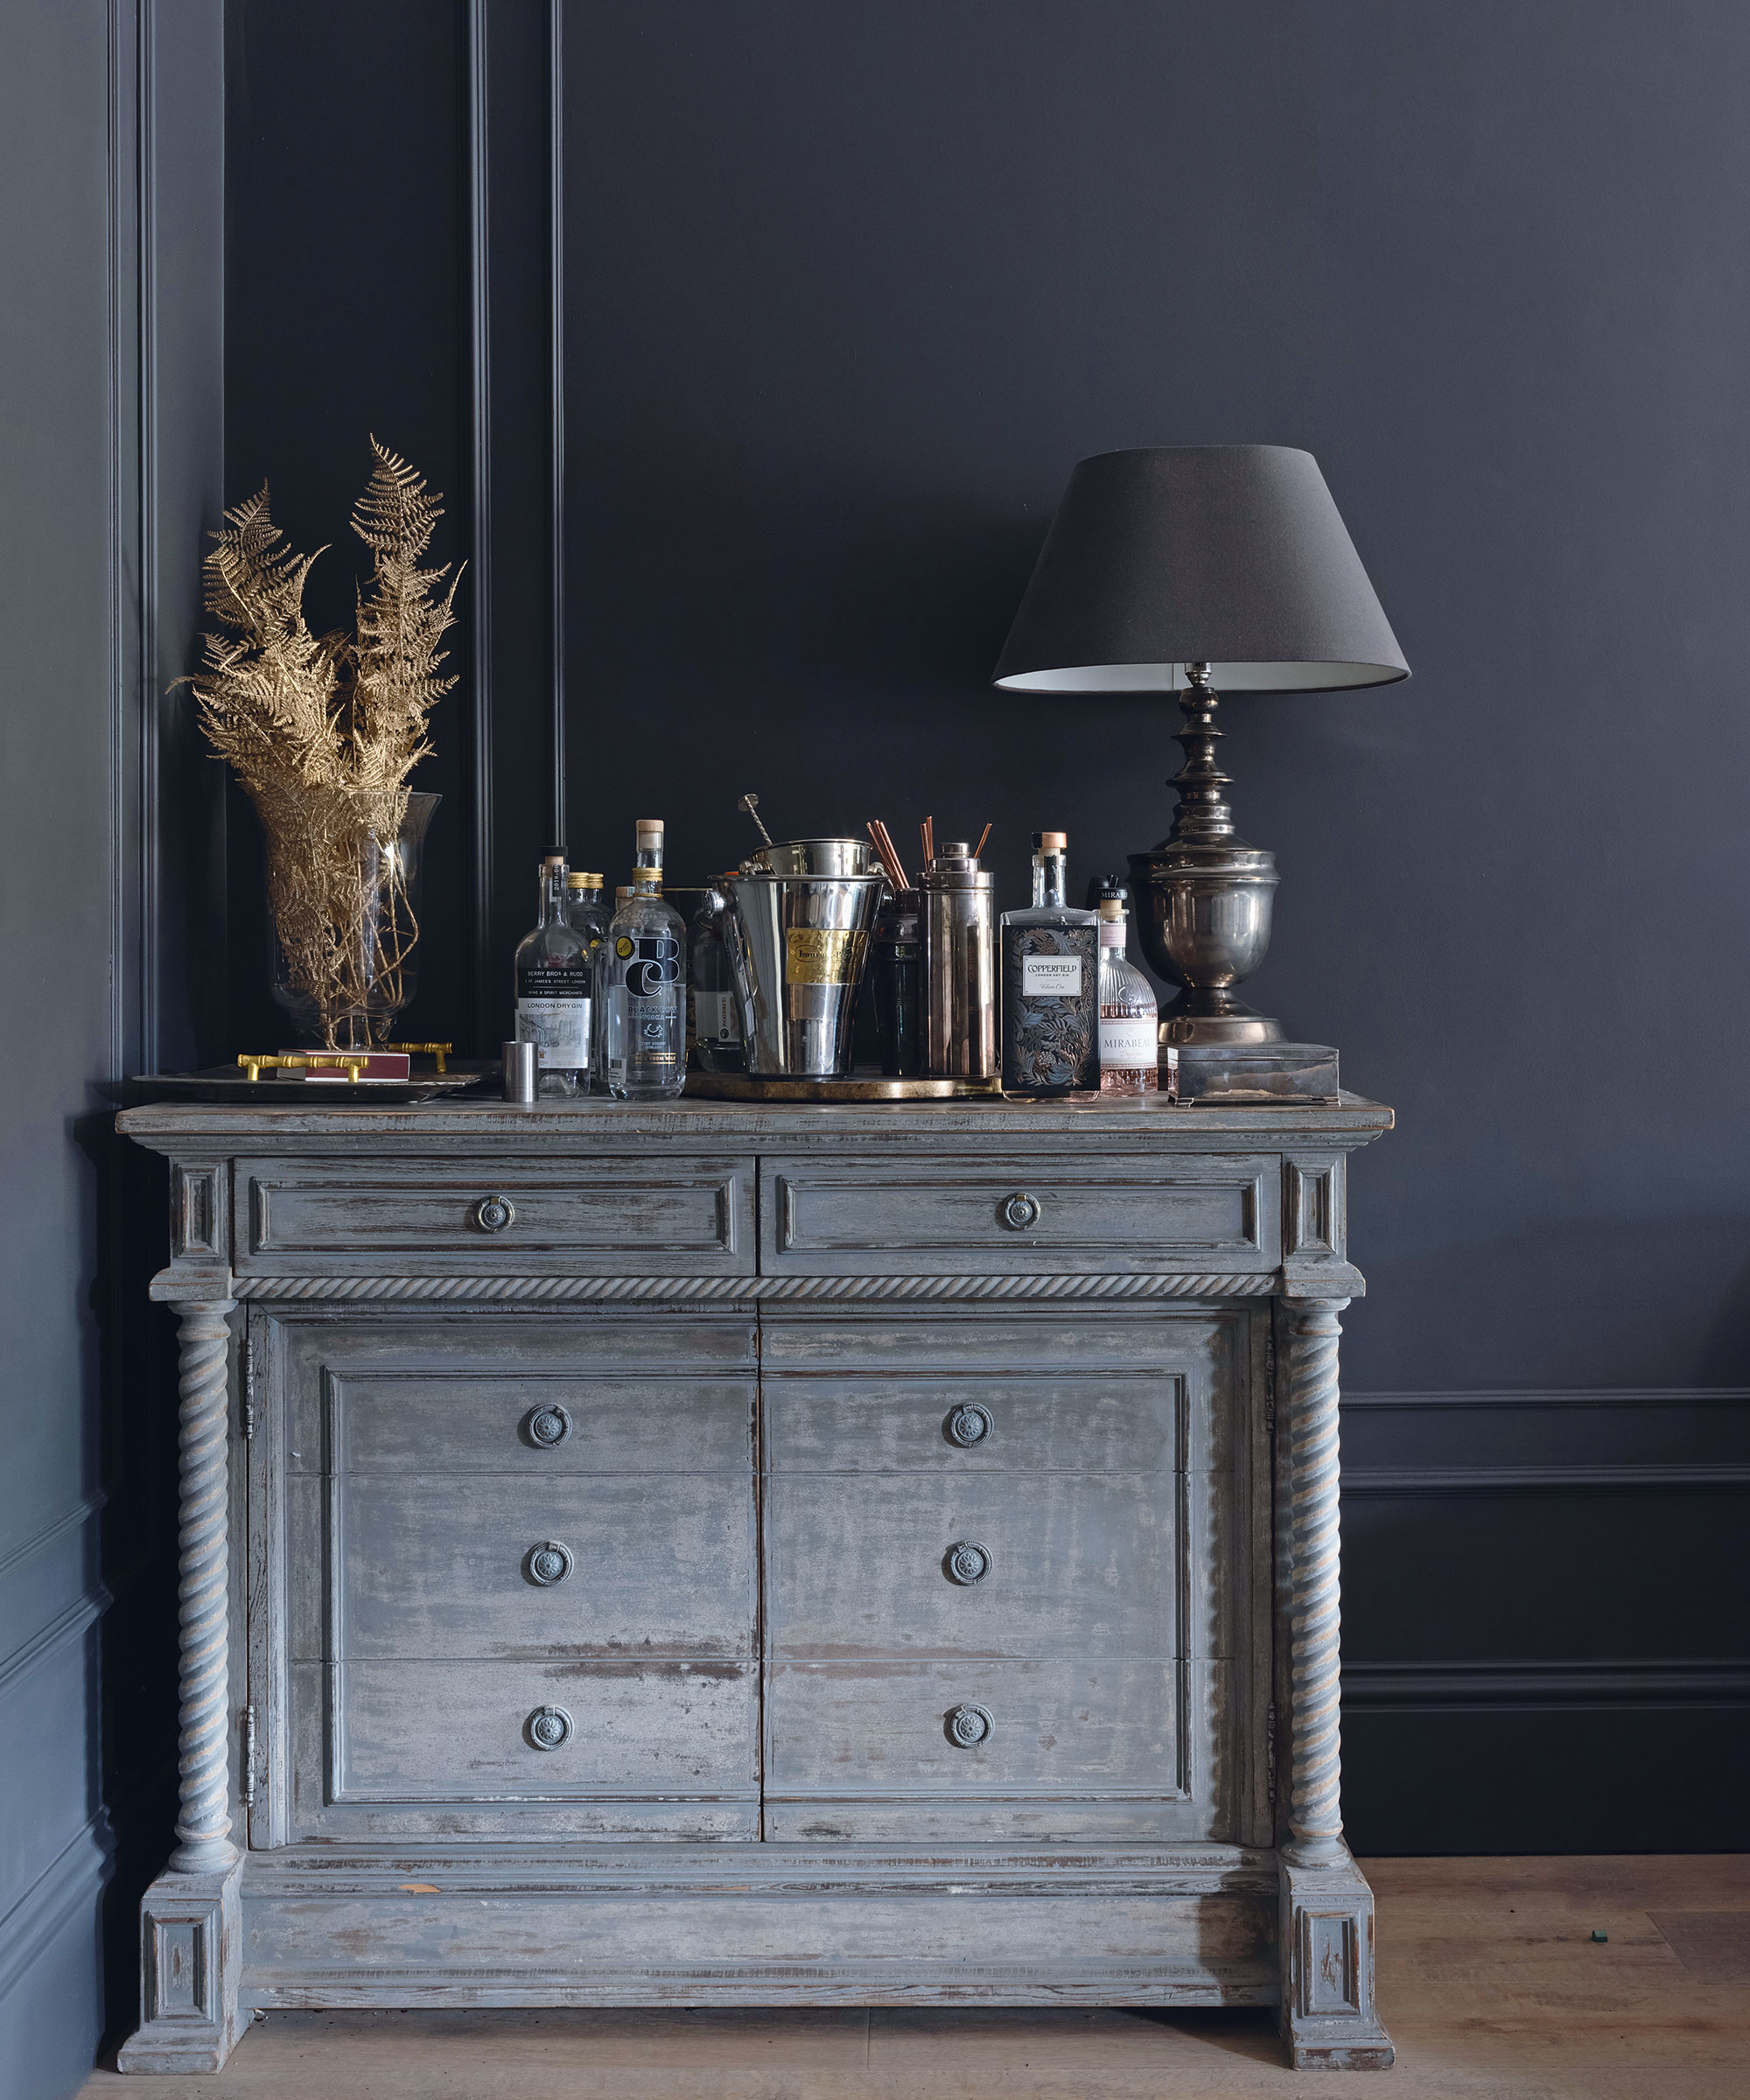 Sideboard topped with barware infront of dark grey painted panelled walls